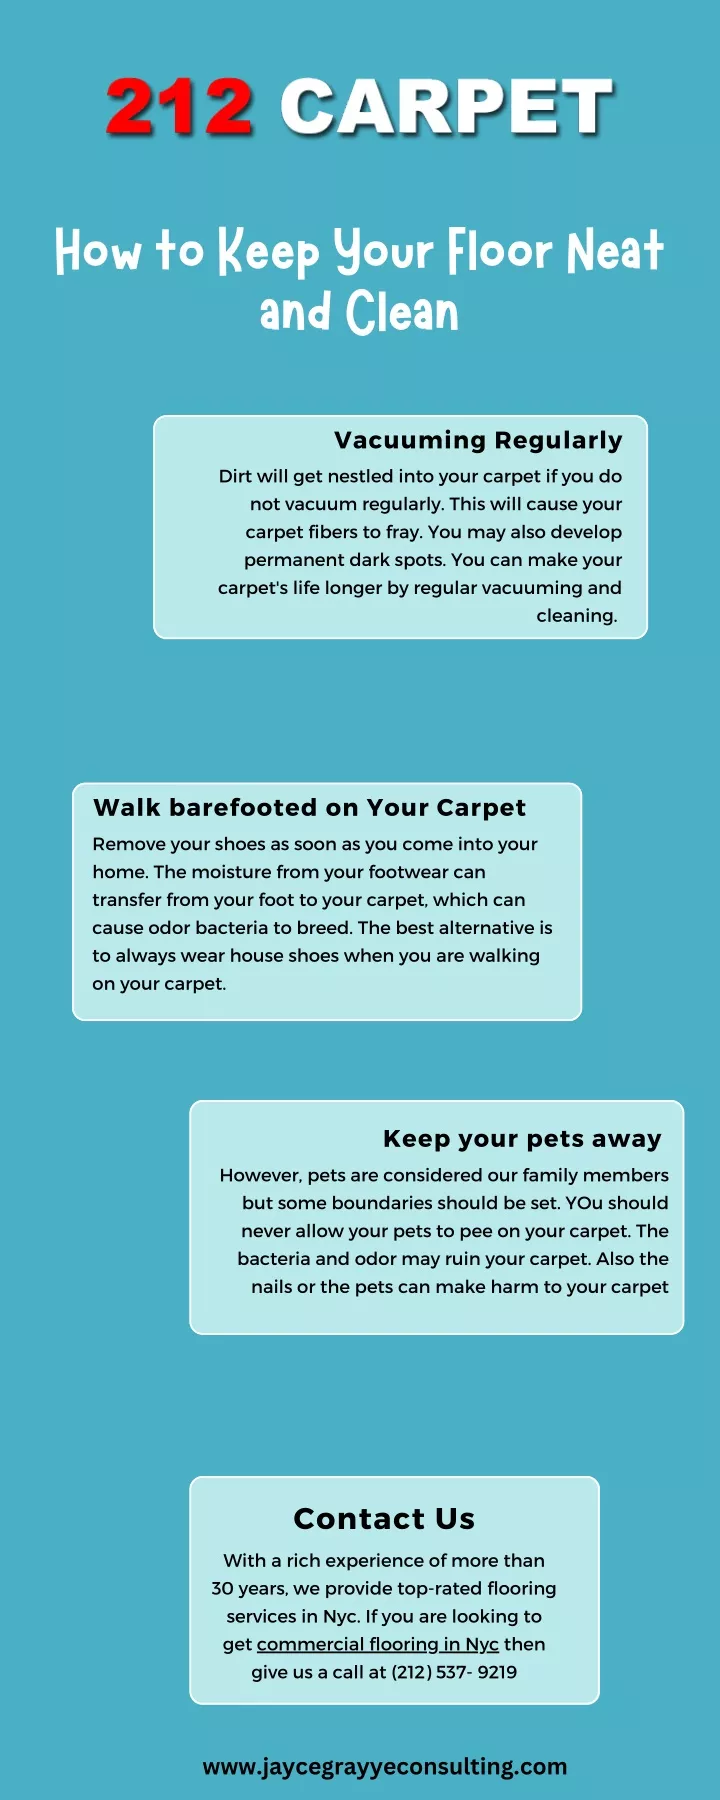 how to keep your floor neat and clean